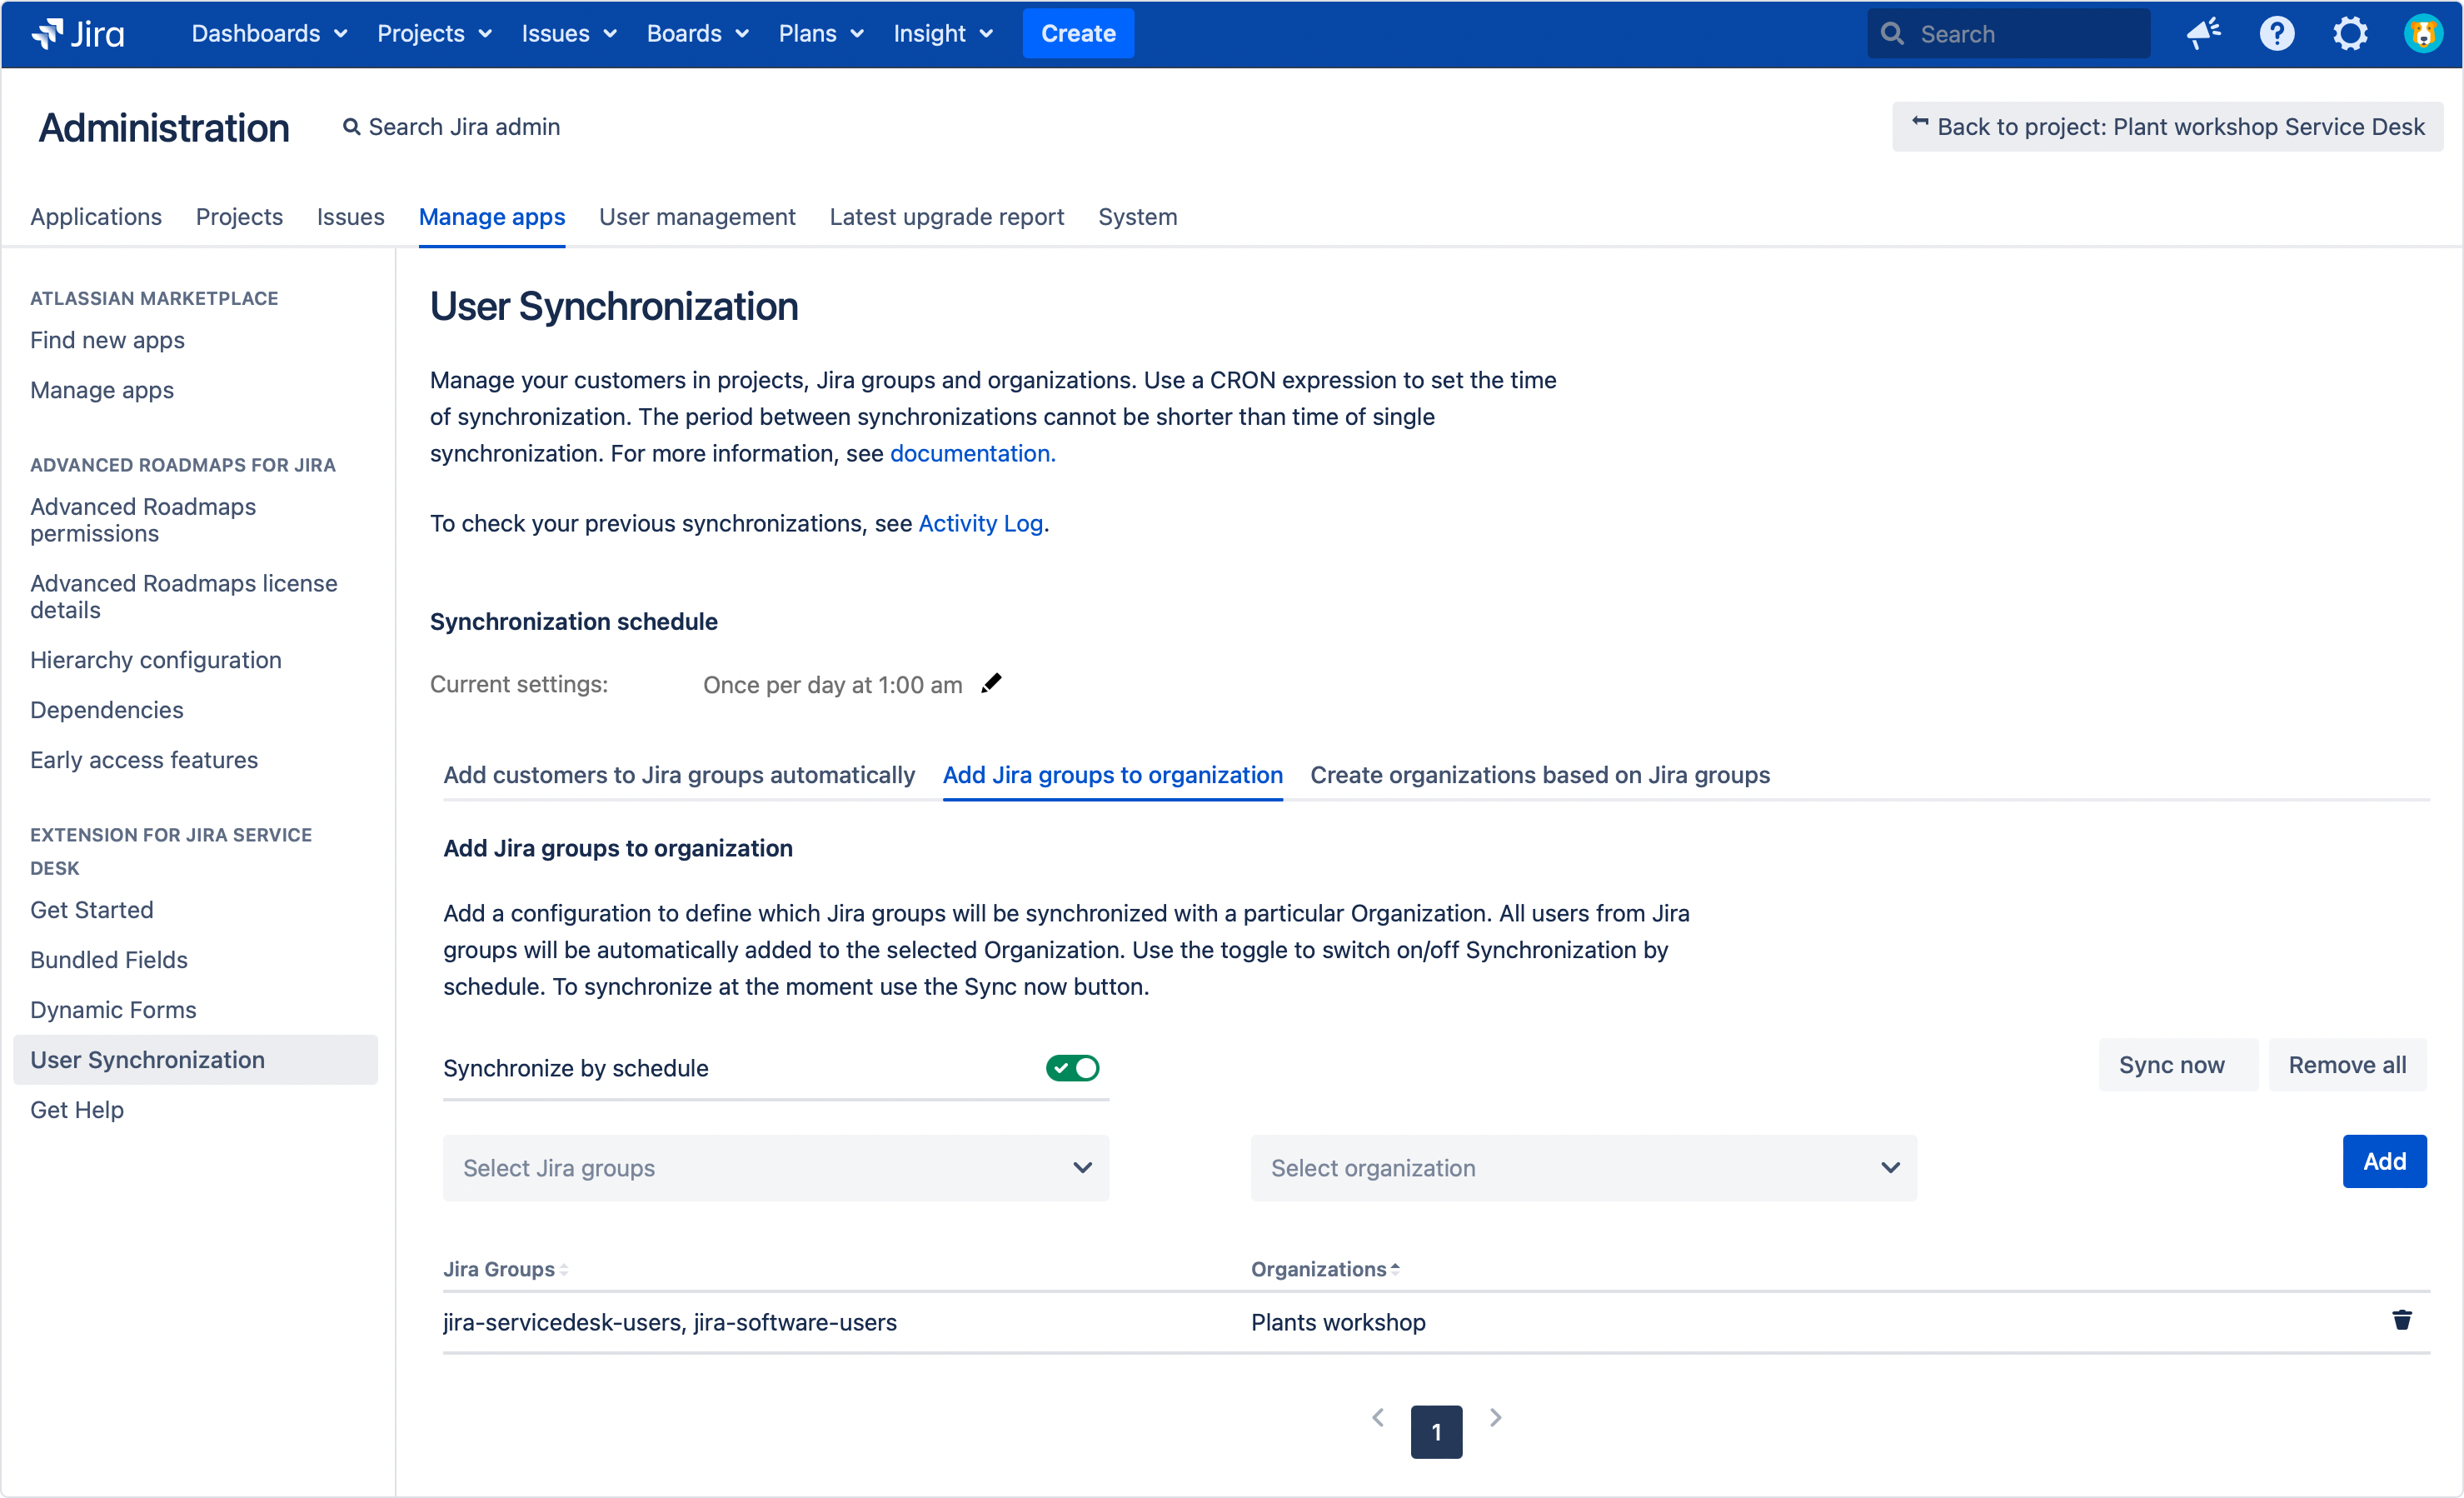 Groups added to Jira Service Management Organizations